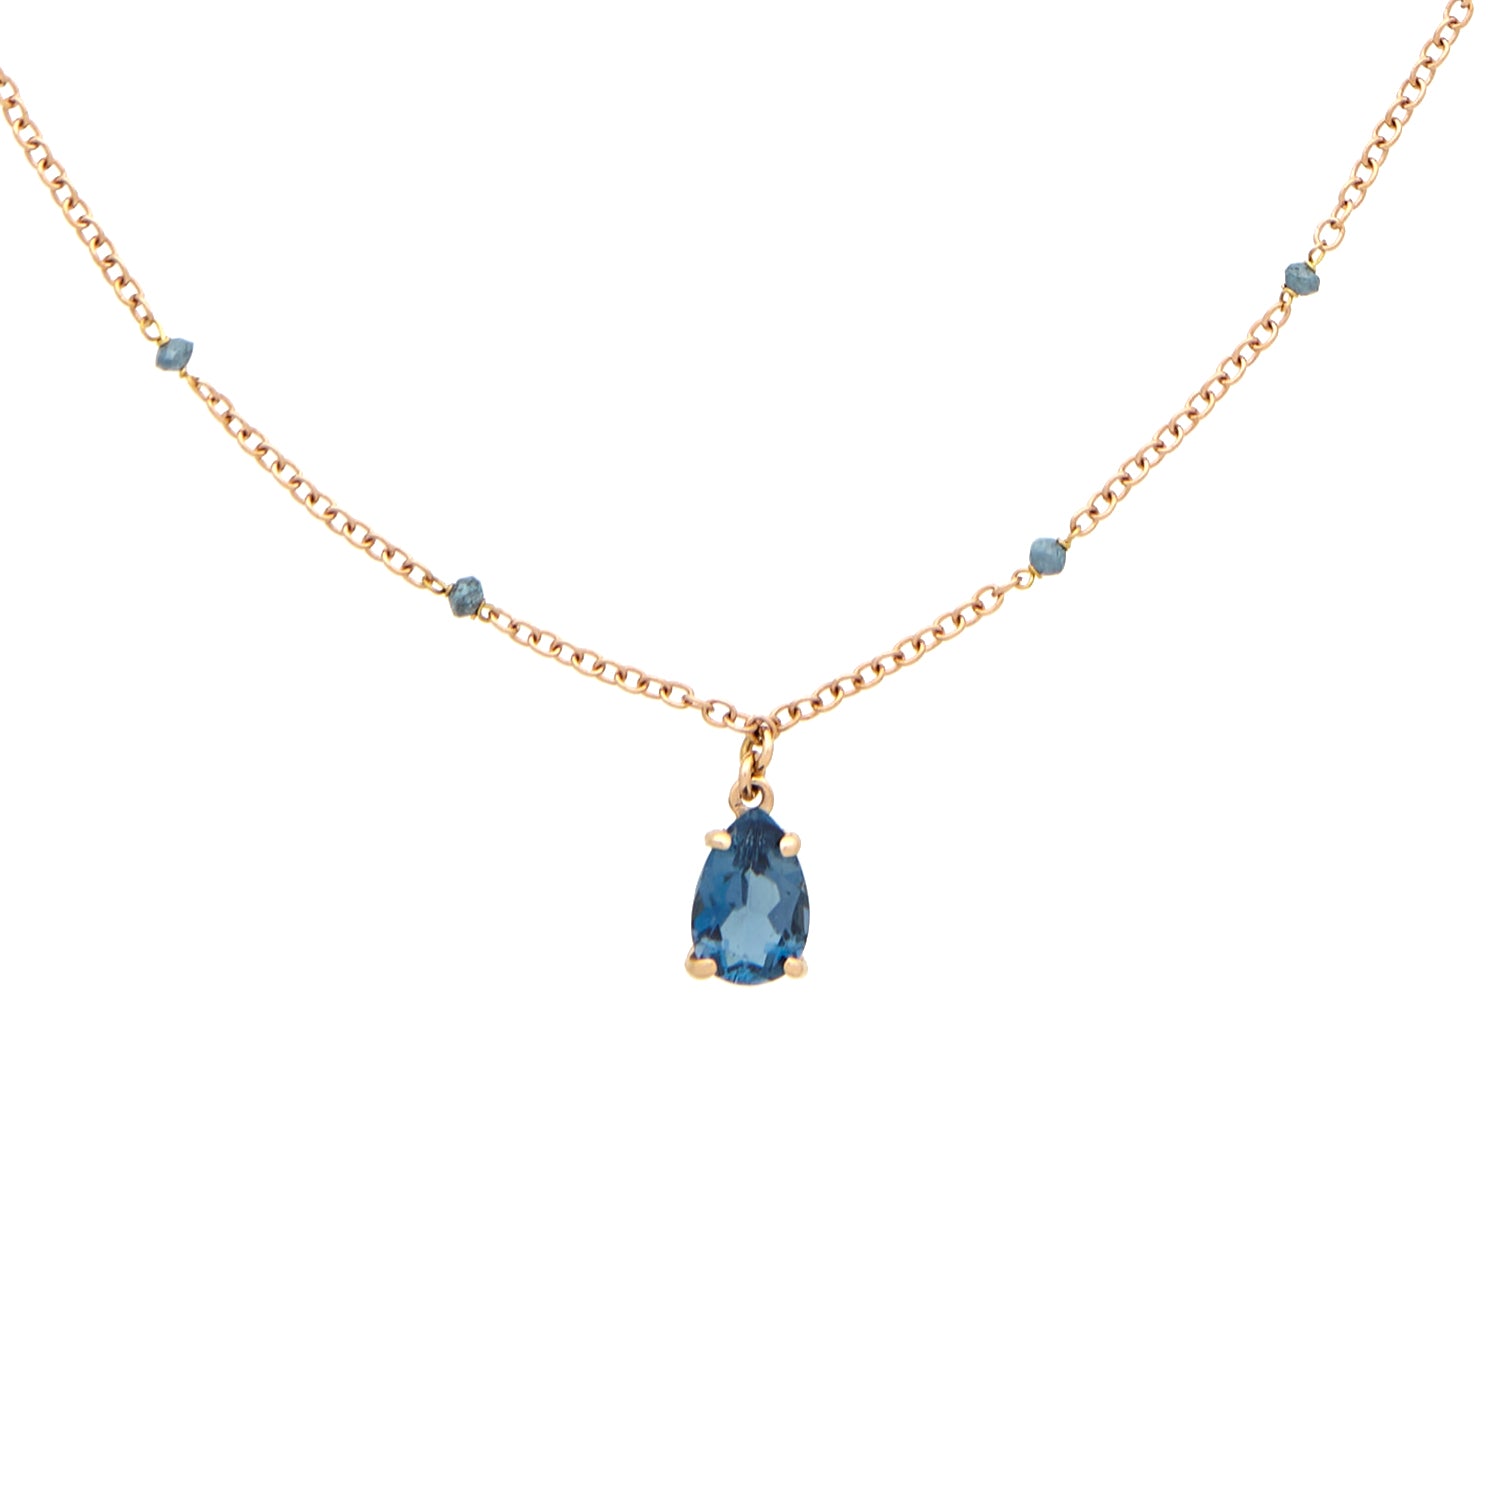 ROSE GOLD NECKLACE WITH LONDON BLUE TOPAS